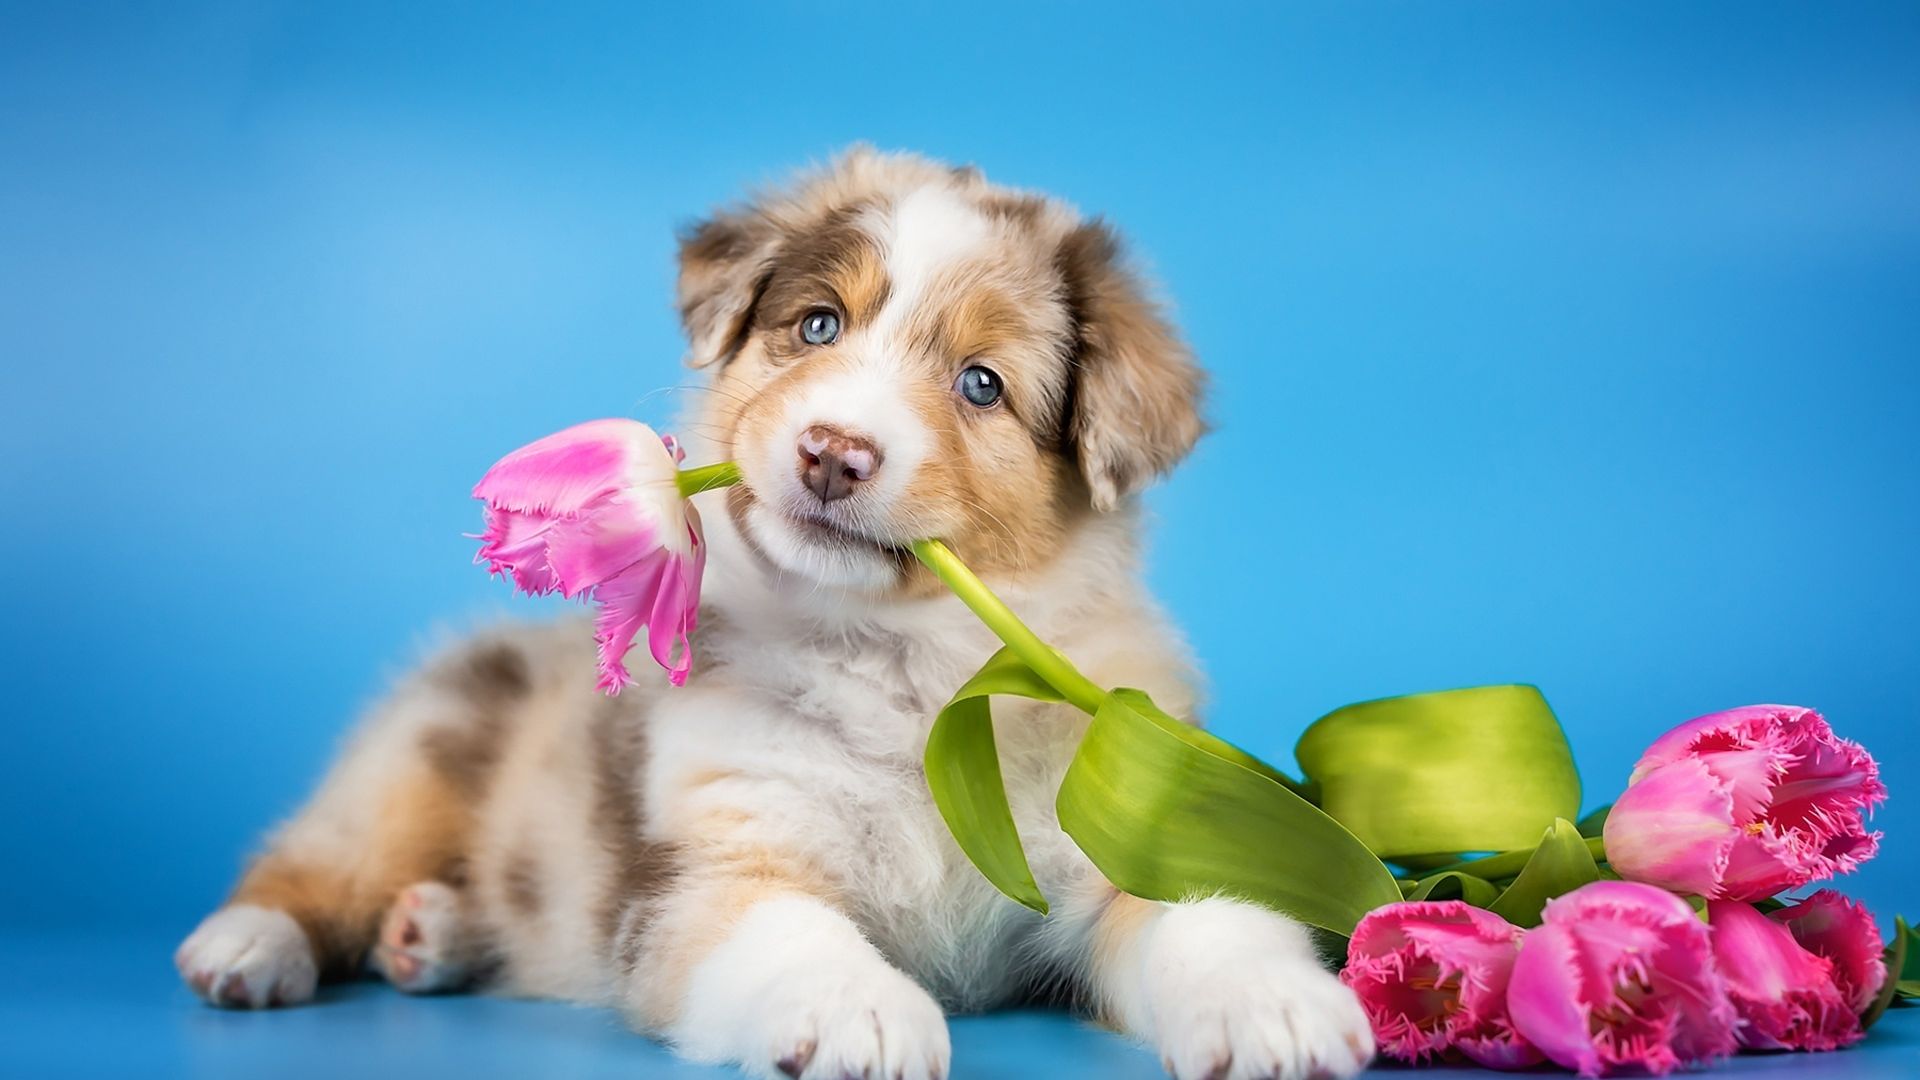 Desktop Wallpaper Cute Dog, Puppy Playing With Flowers, Adorable, Hd Image,  Picture, Background, F38876